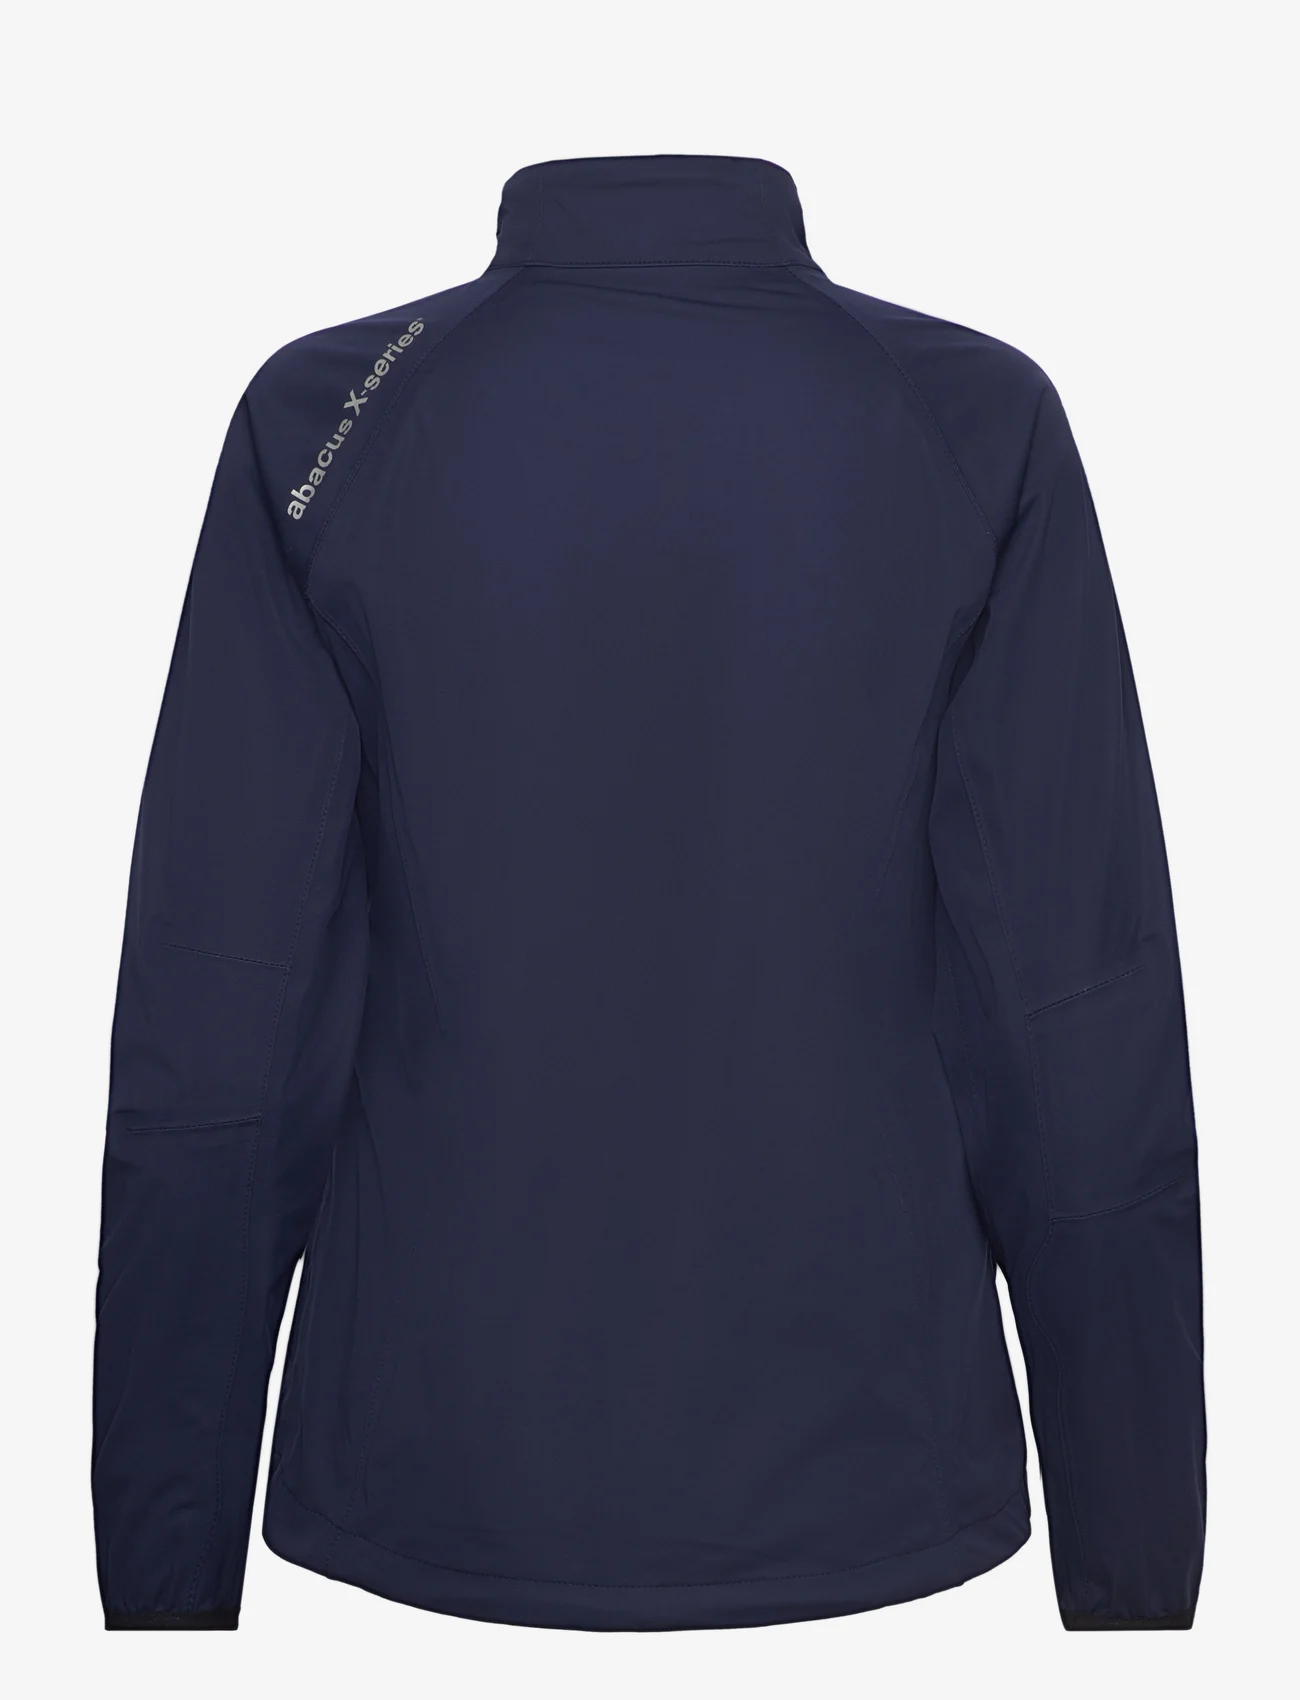 Abacus - Lds PDX waterproof jacket - golf jackets - midnight navy - 1